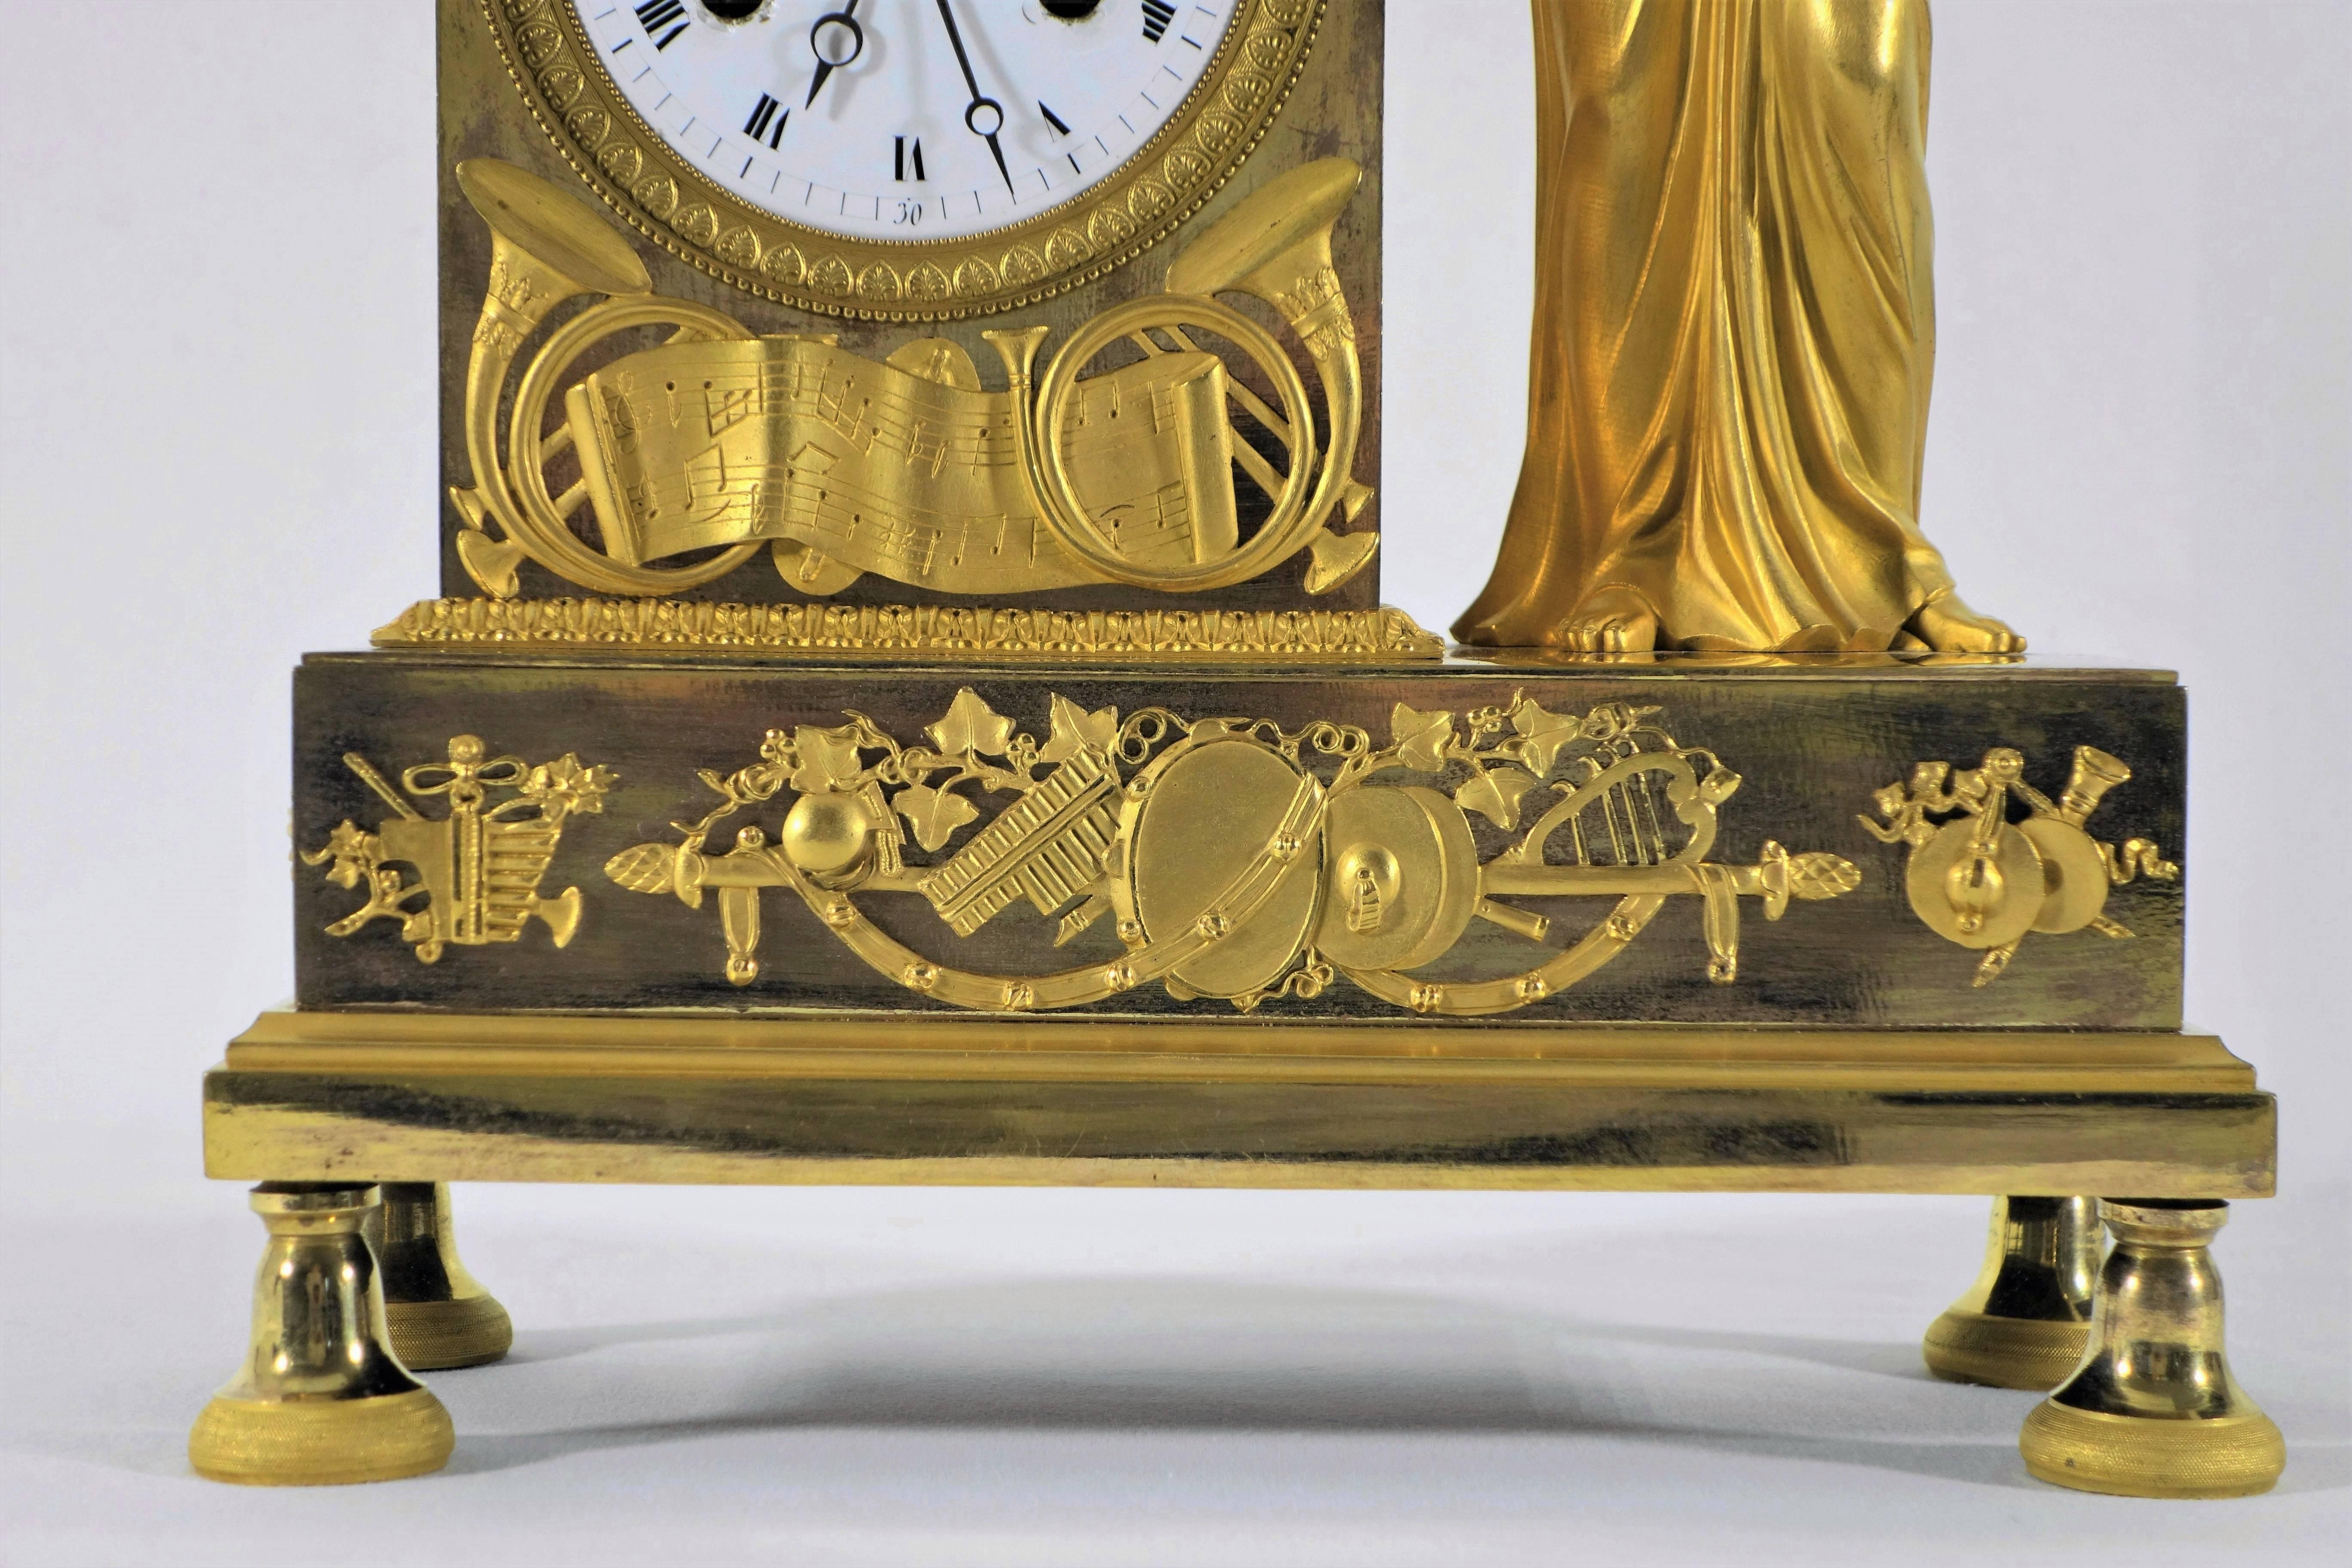 French Empire mantel clock, gilt bronze. A classically dressed female flutist is standing by the clock. The rectangular base is richly decorated with music instruments. Clockwork stamped with AB.
 pendulum and key included.
Dimensions: (H x B x D)